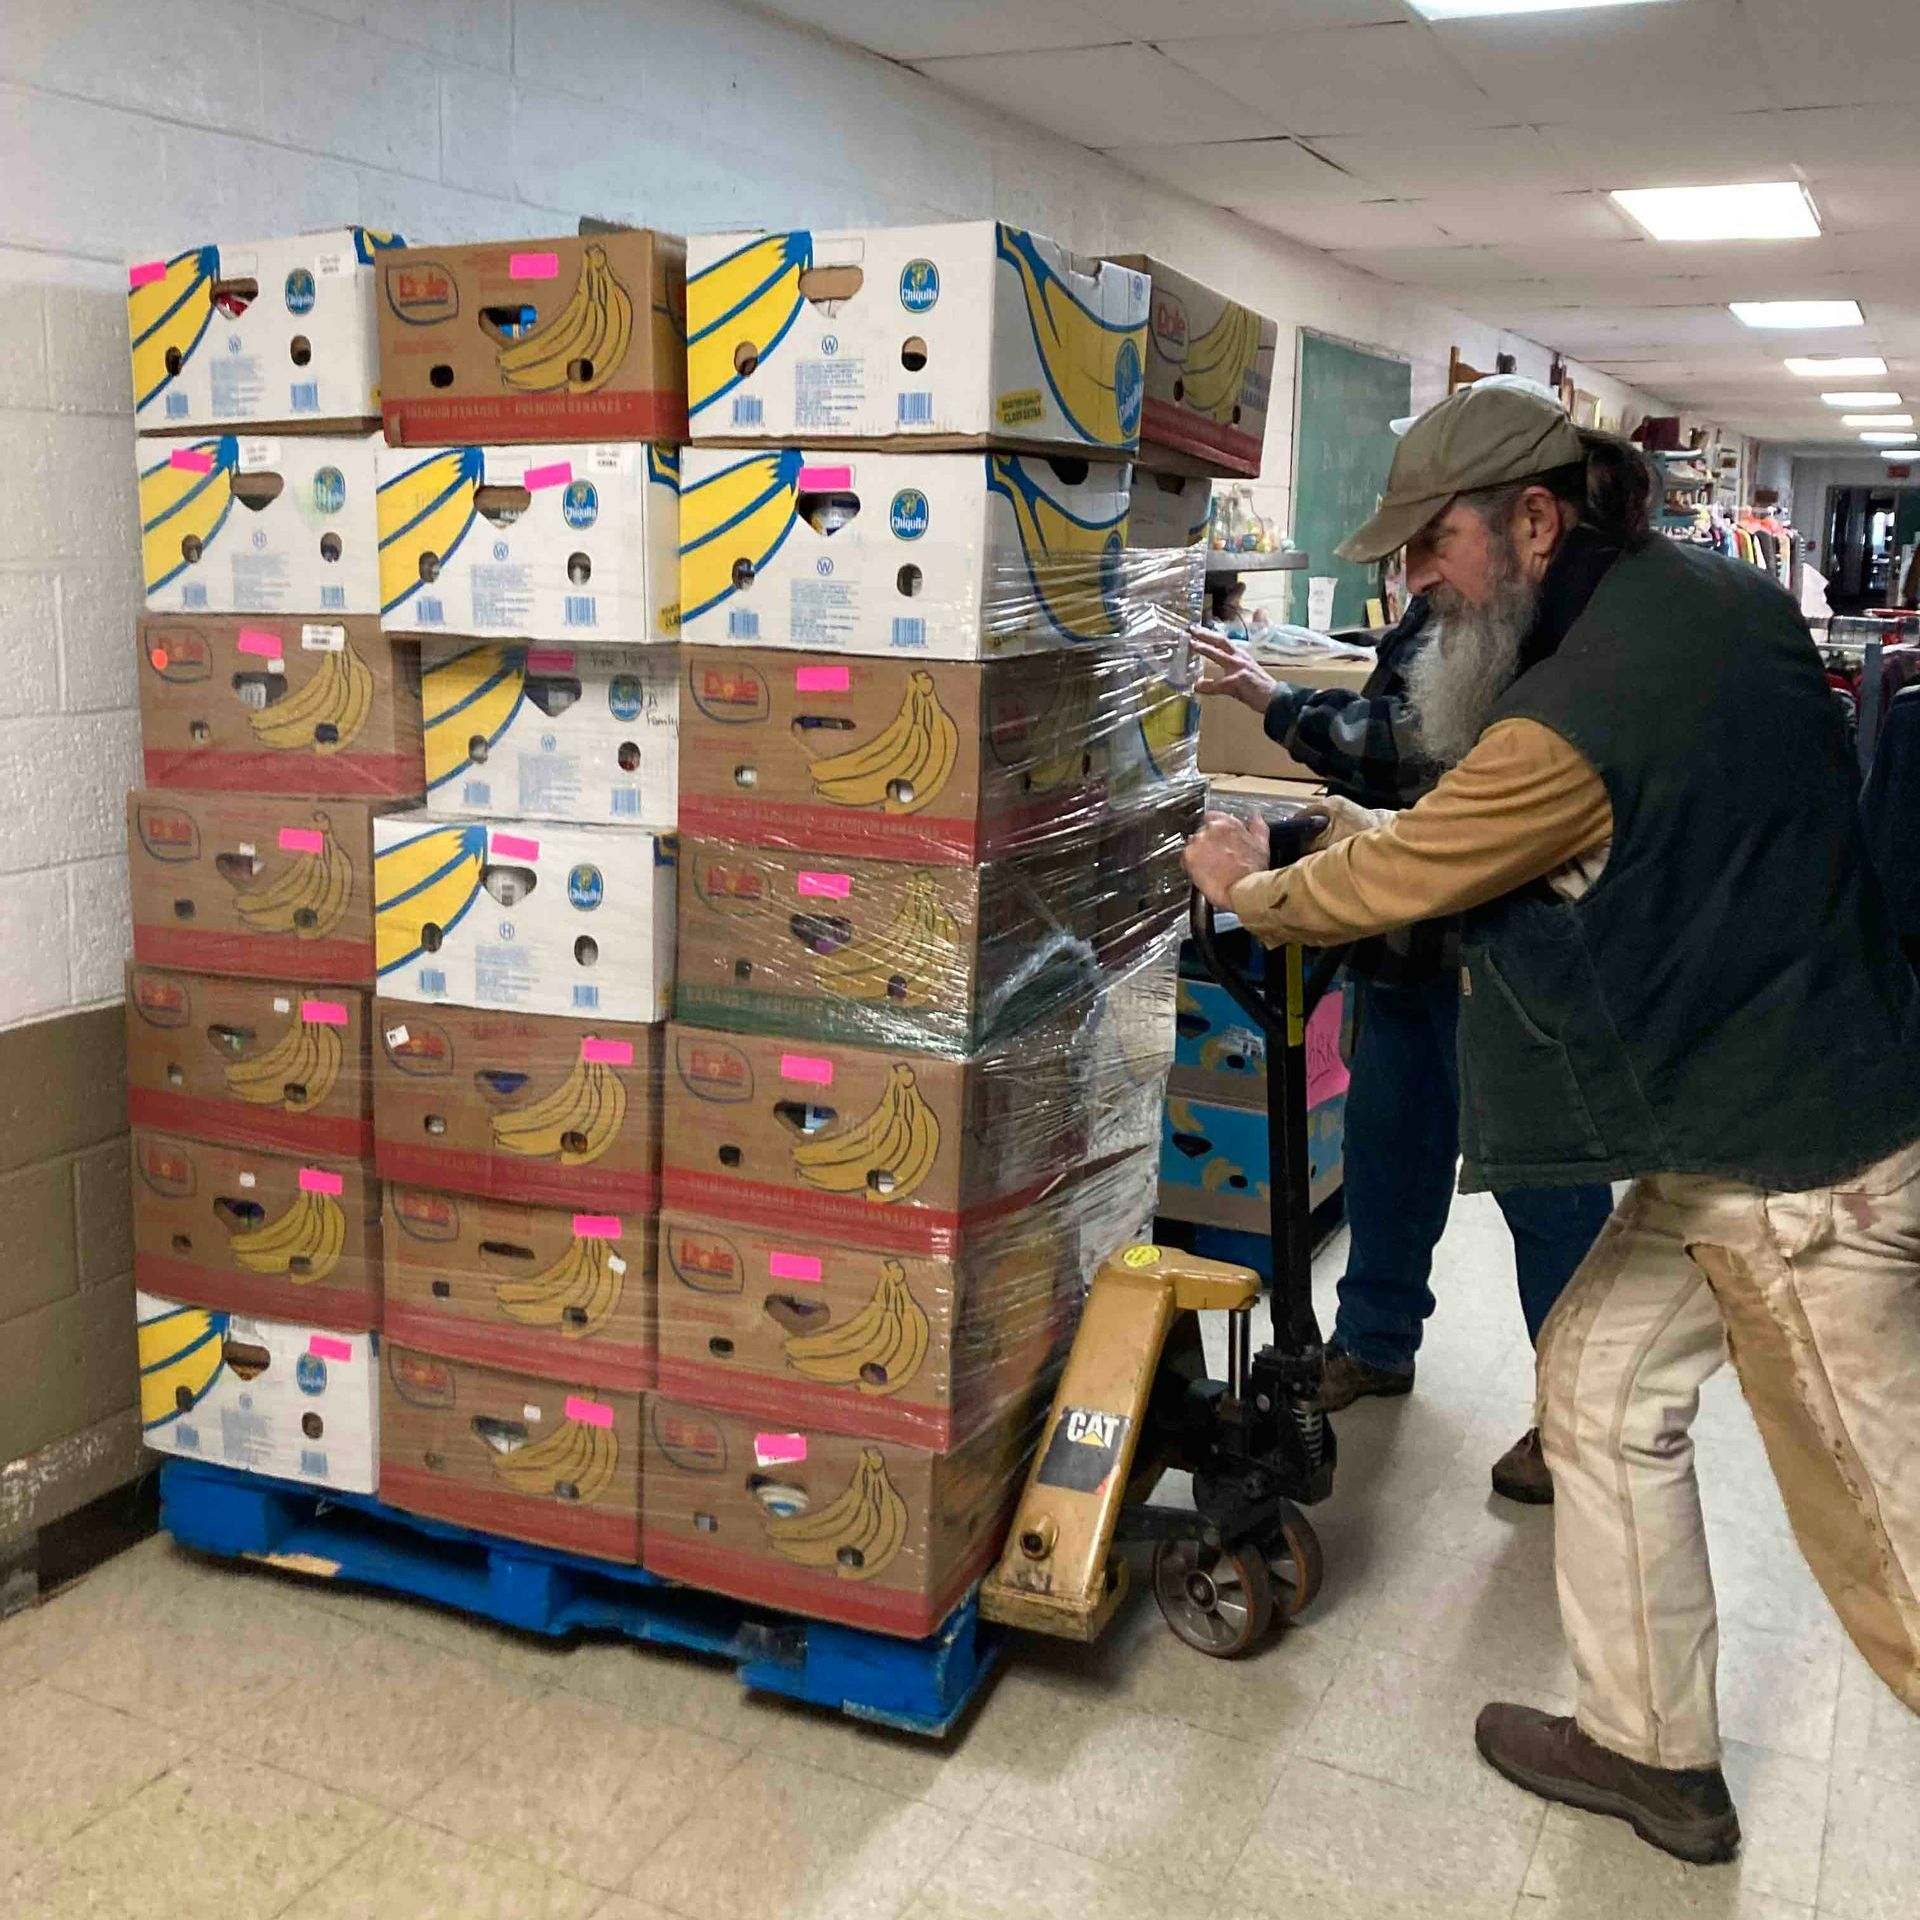 A man is pushing a pallet with banana boxes on it.